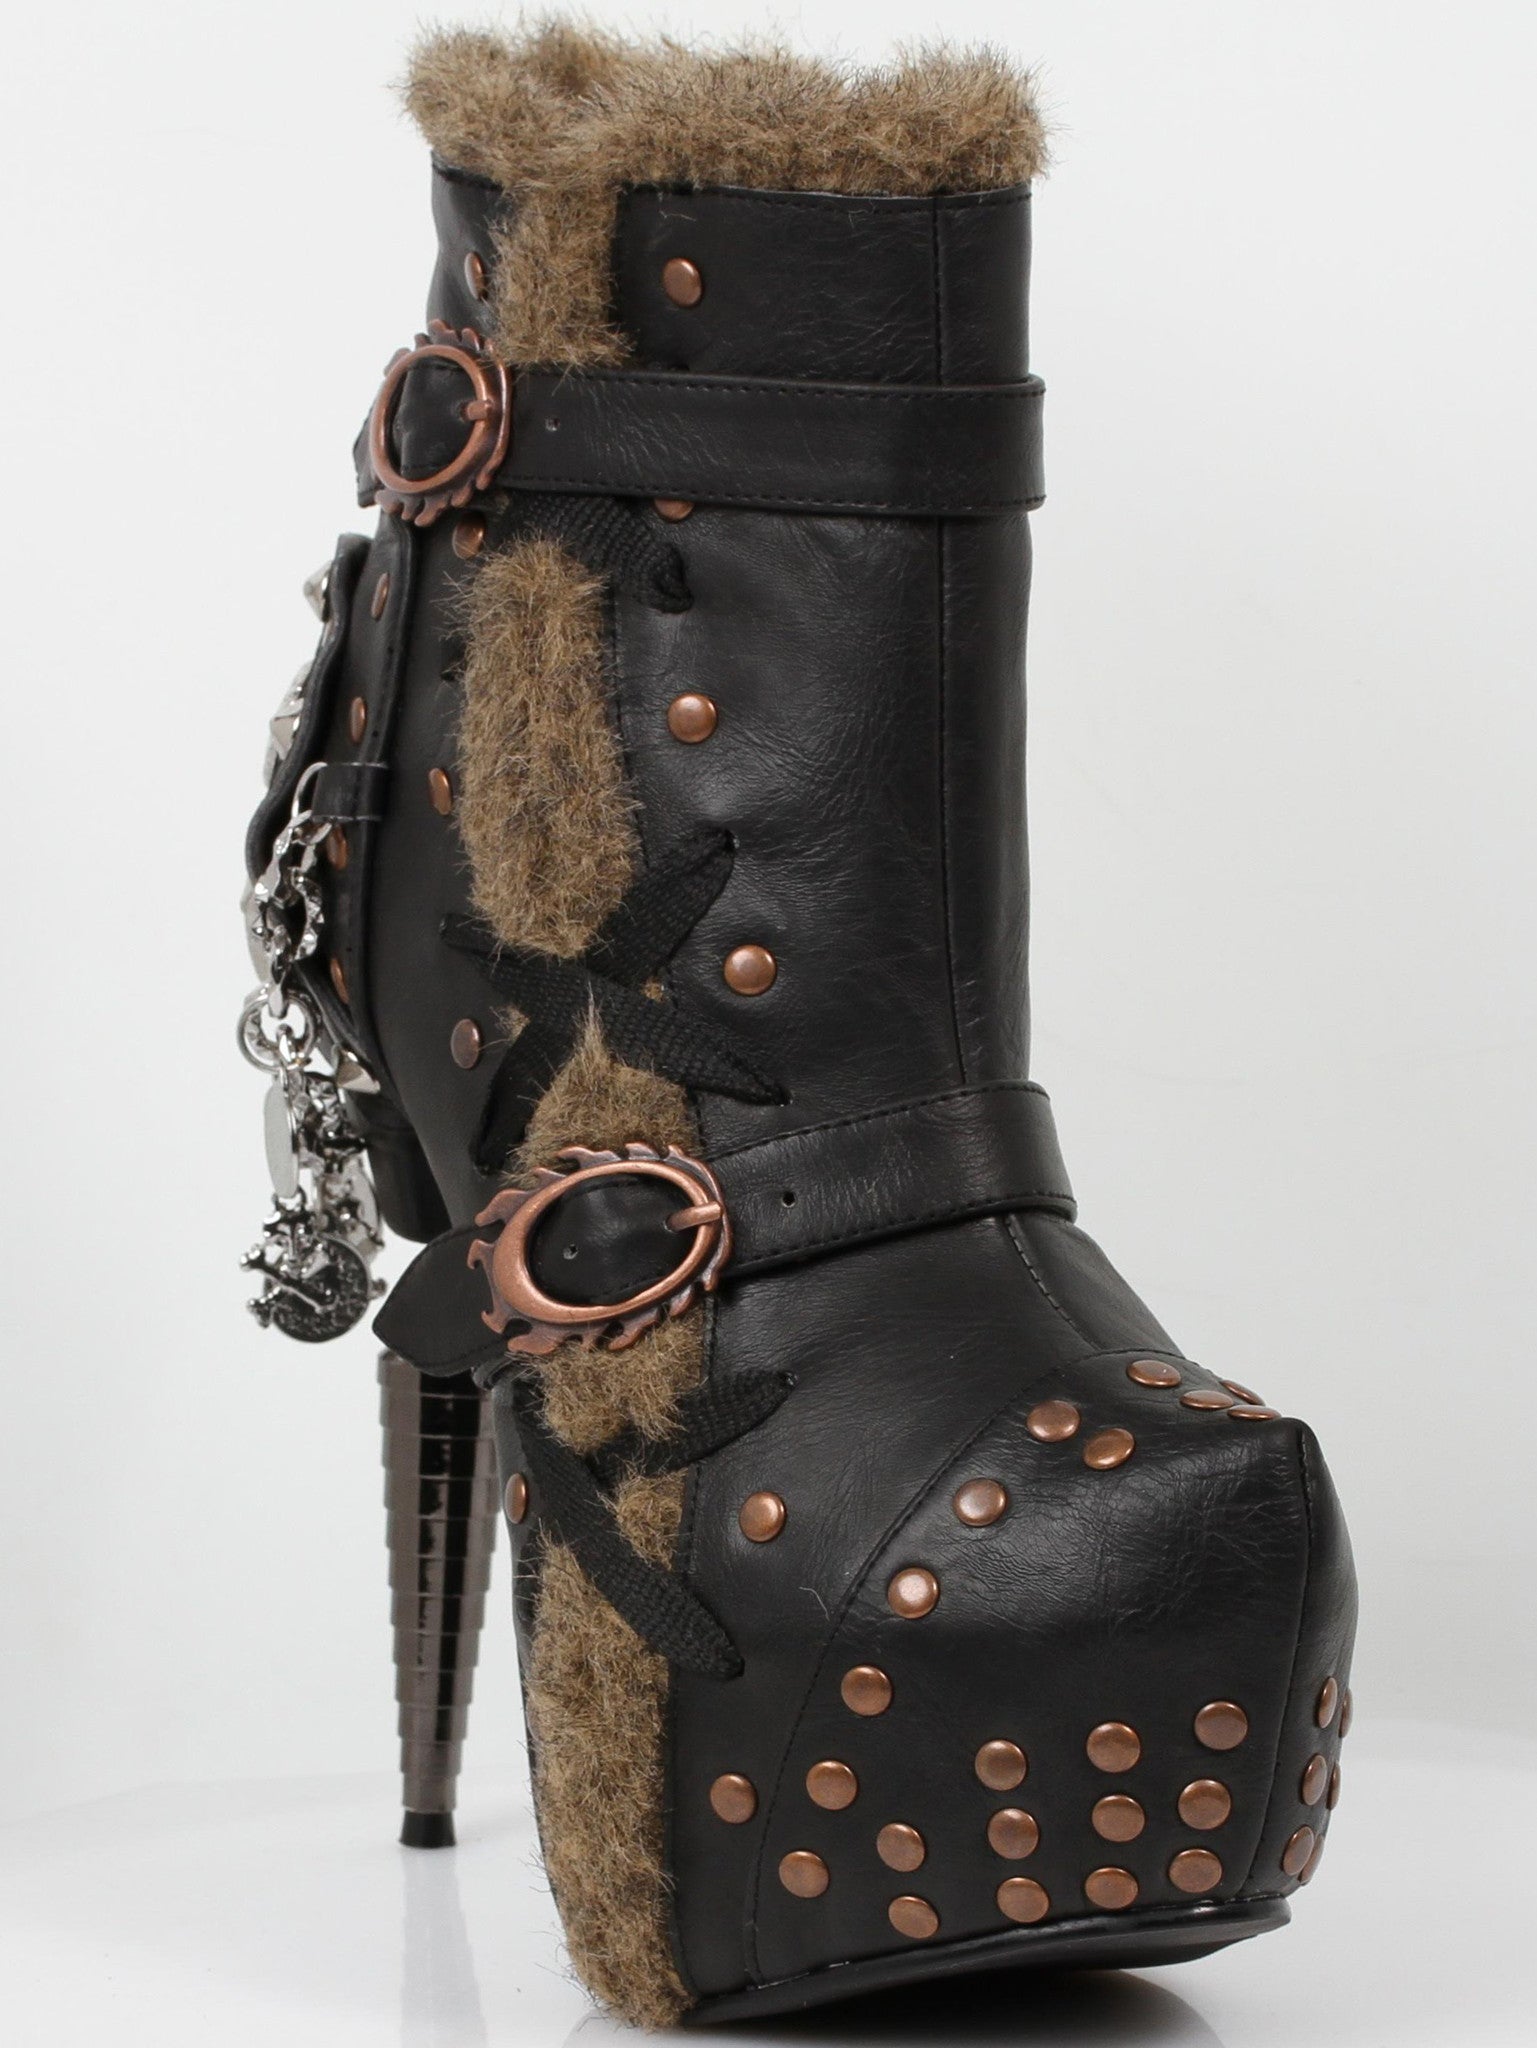 Hades Shoes - Griffin Steampunk Booties